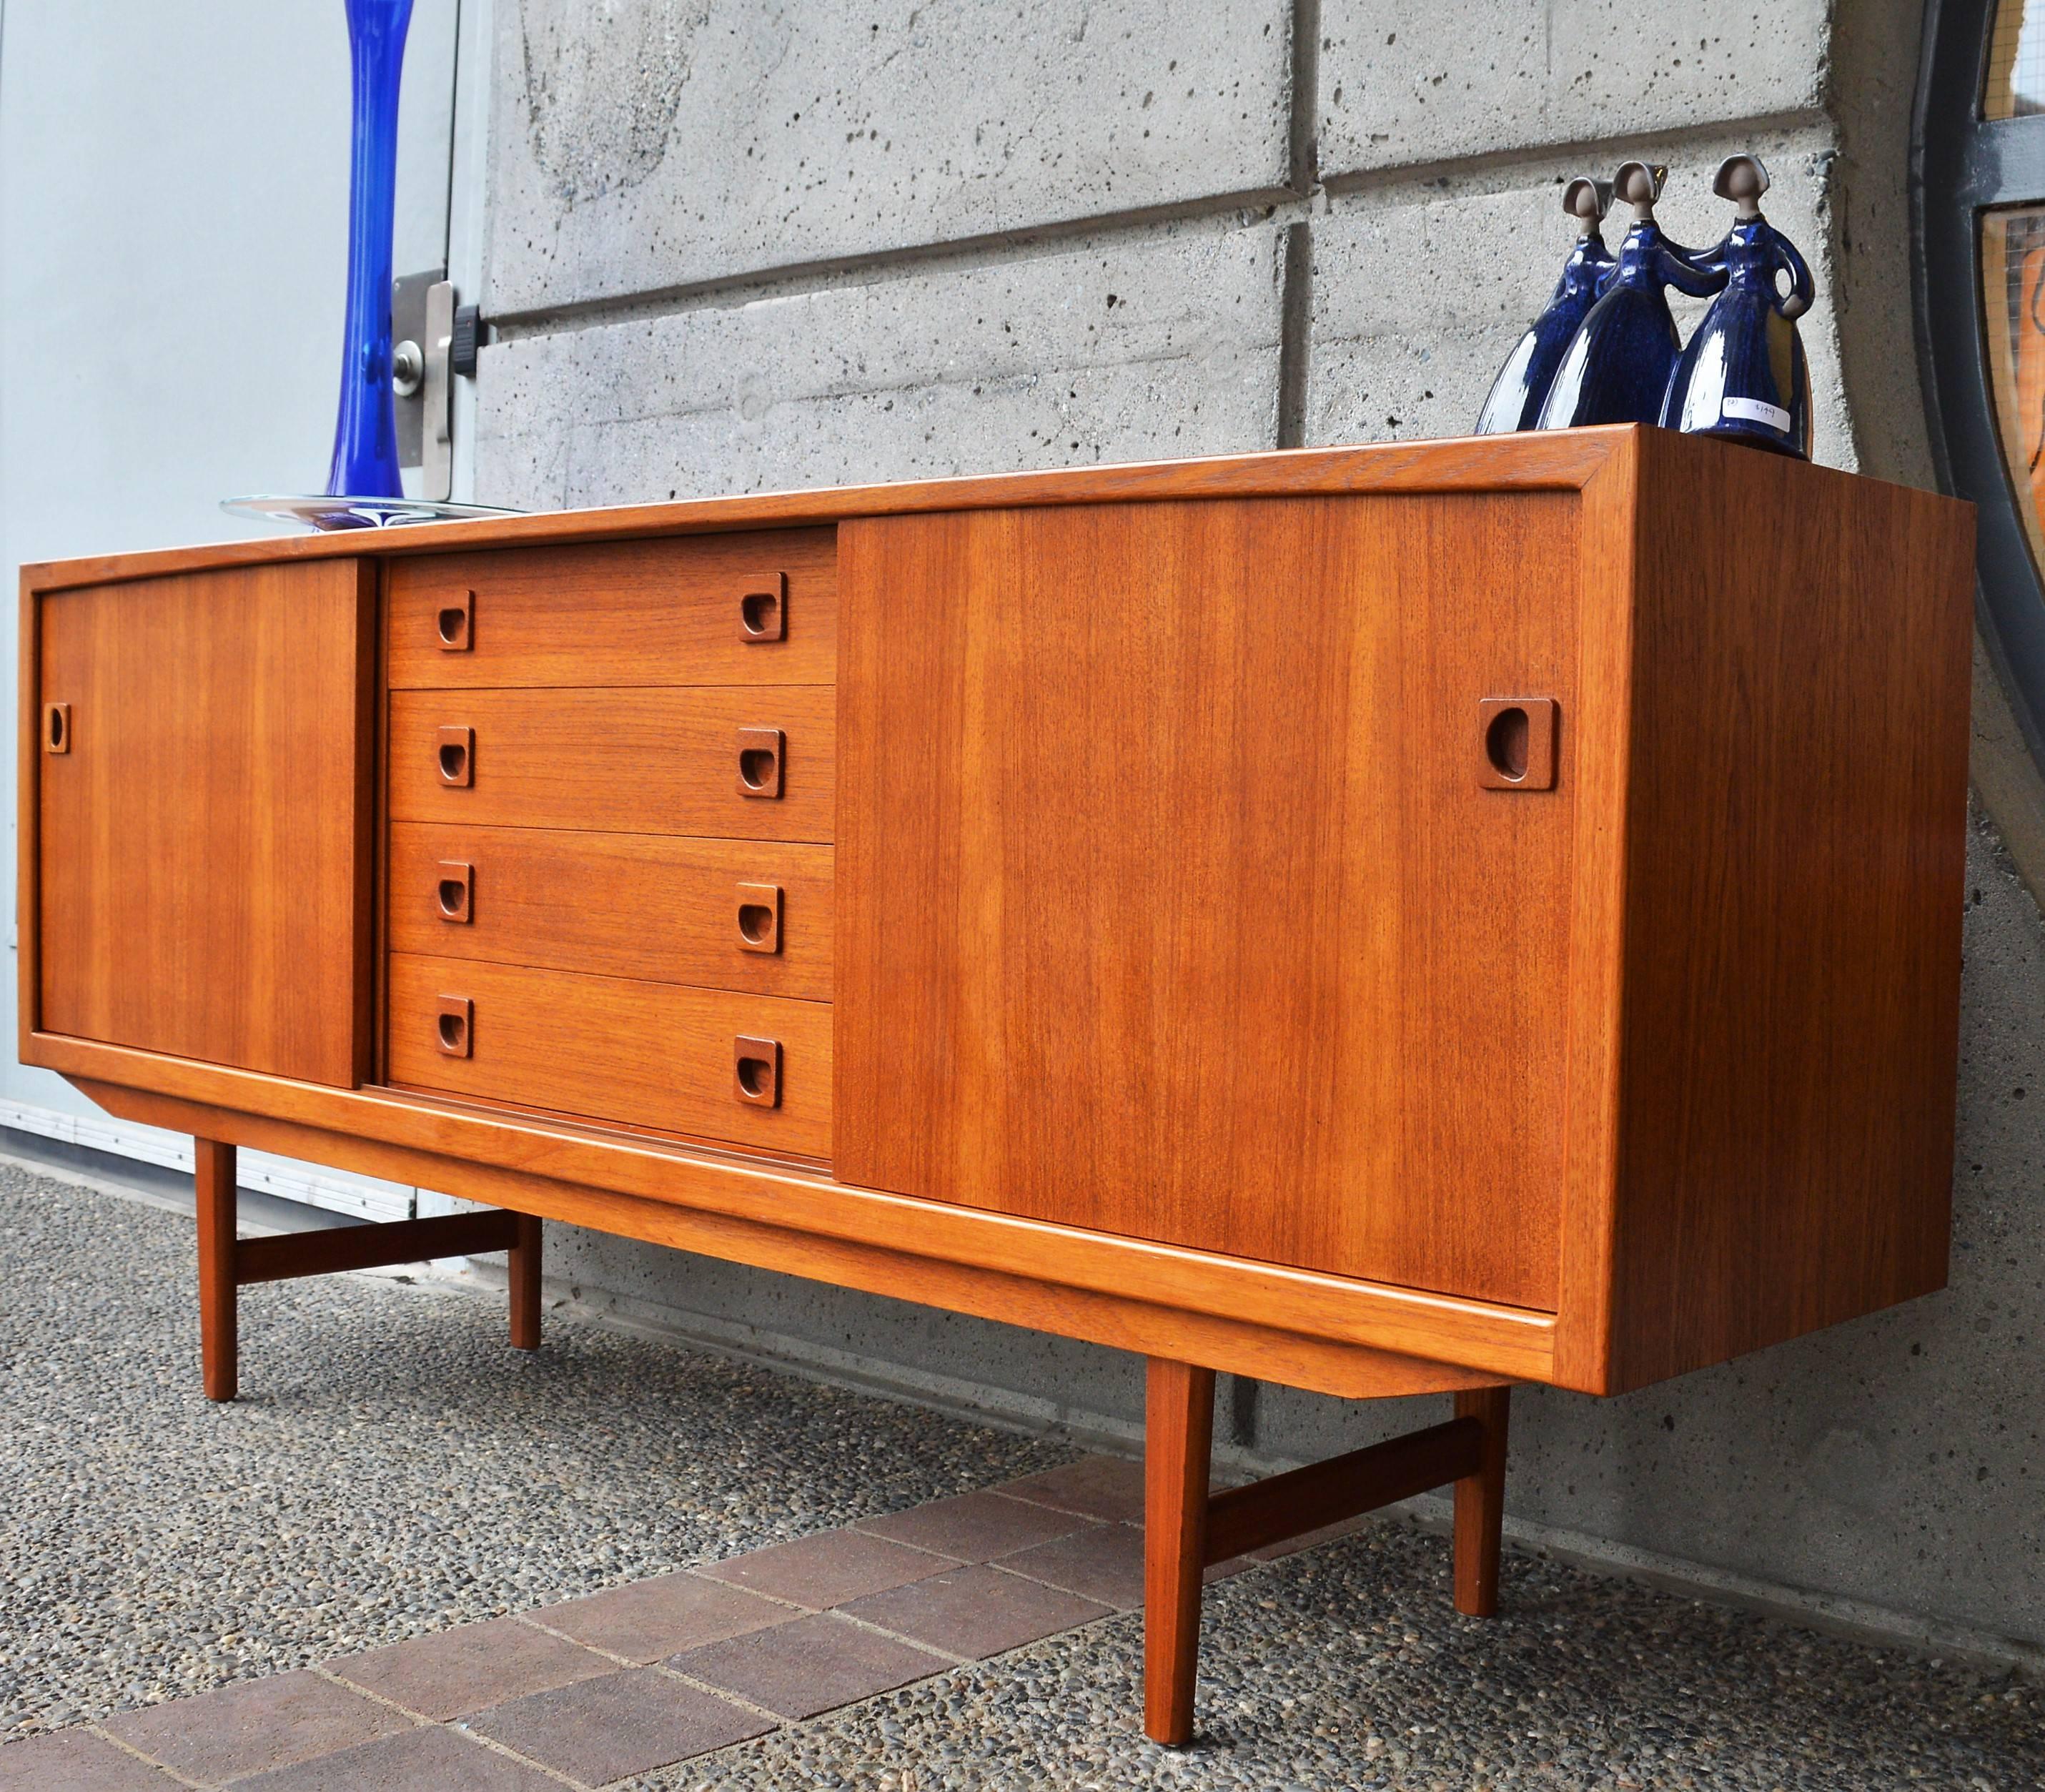 Mid-20th Century Danish Modern Teak Buffet / Credenza with Centre Drawers and Sword Blade Legs